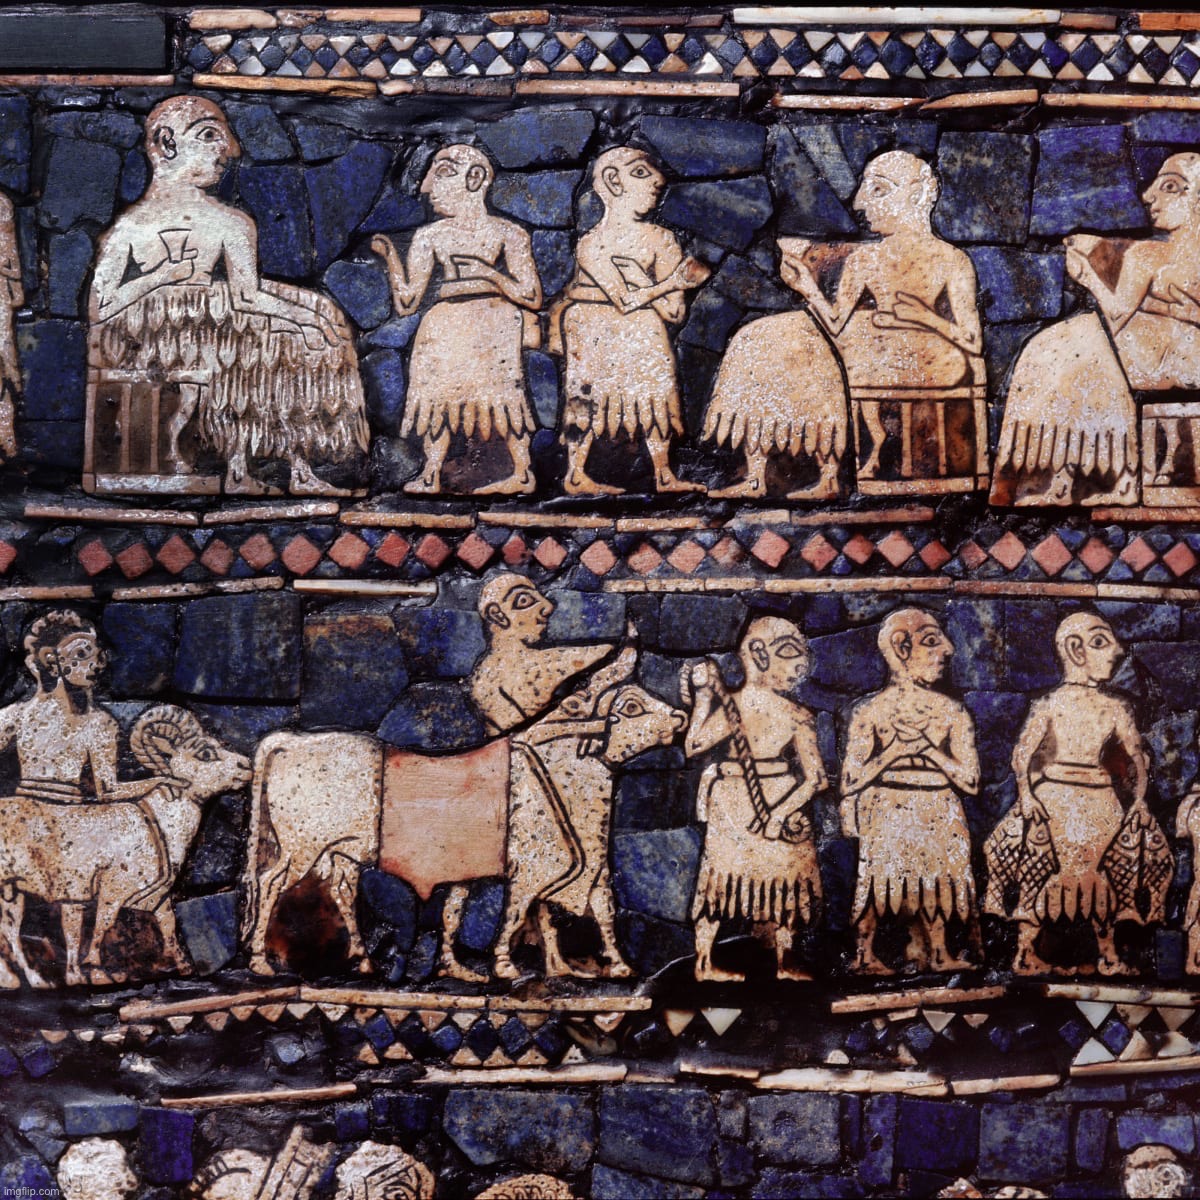 Sumerian wall painting | image tagged in sumerian wall painting | made w/ Imgflip meme maker